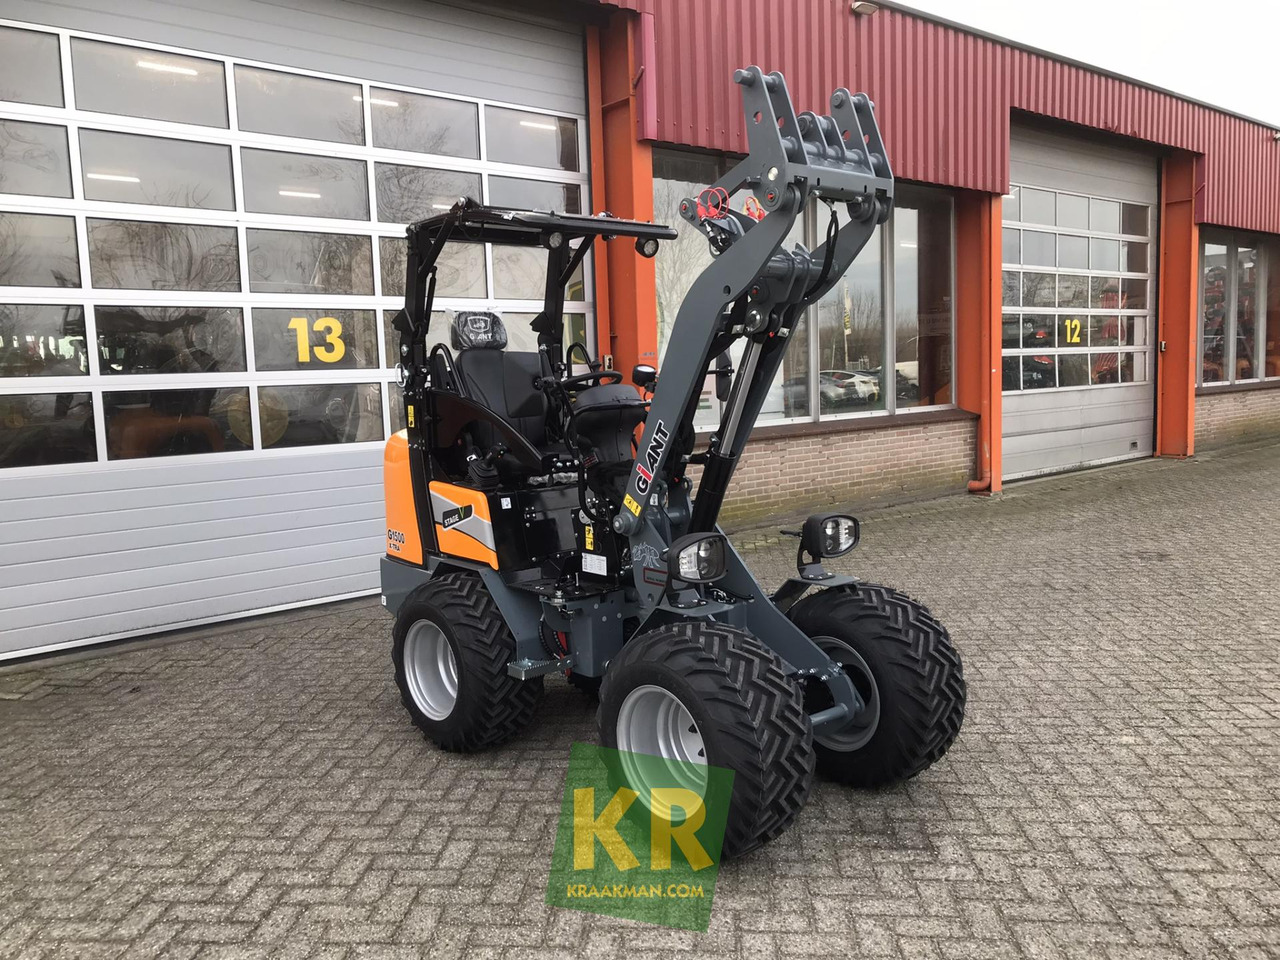 Compact loader G1500 X-tra Giant